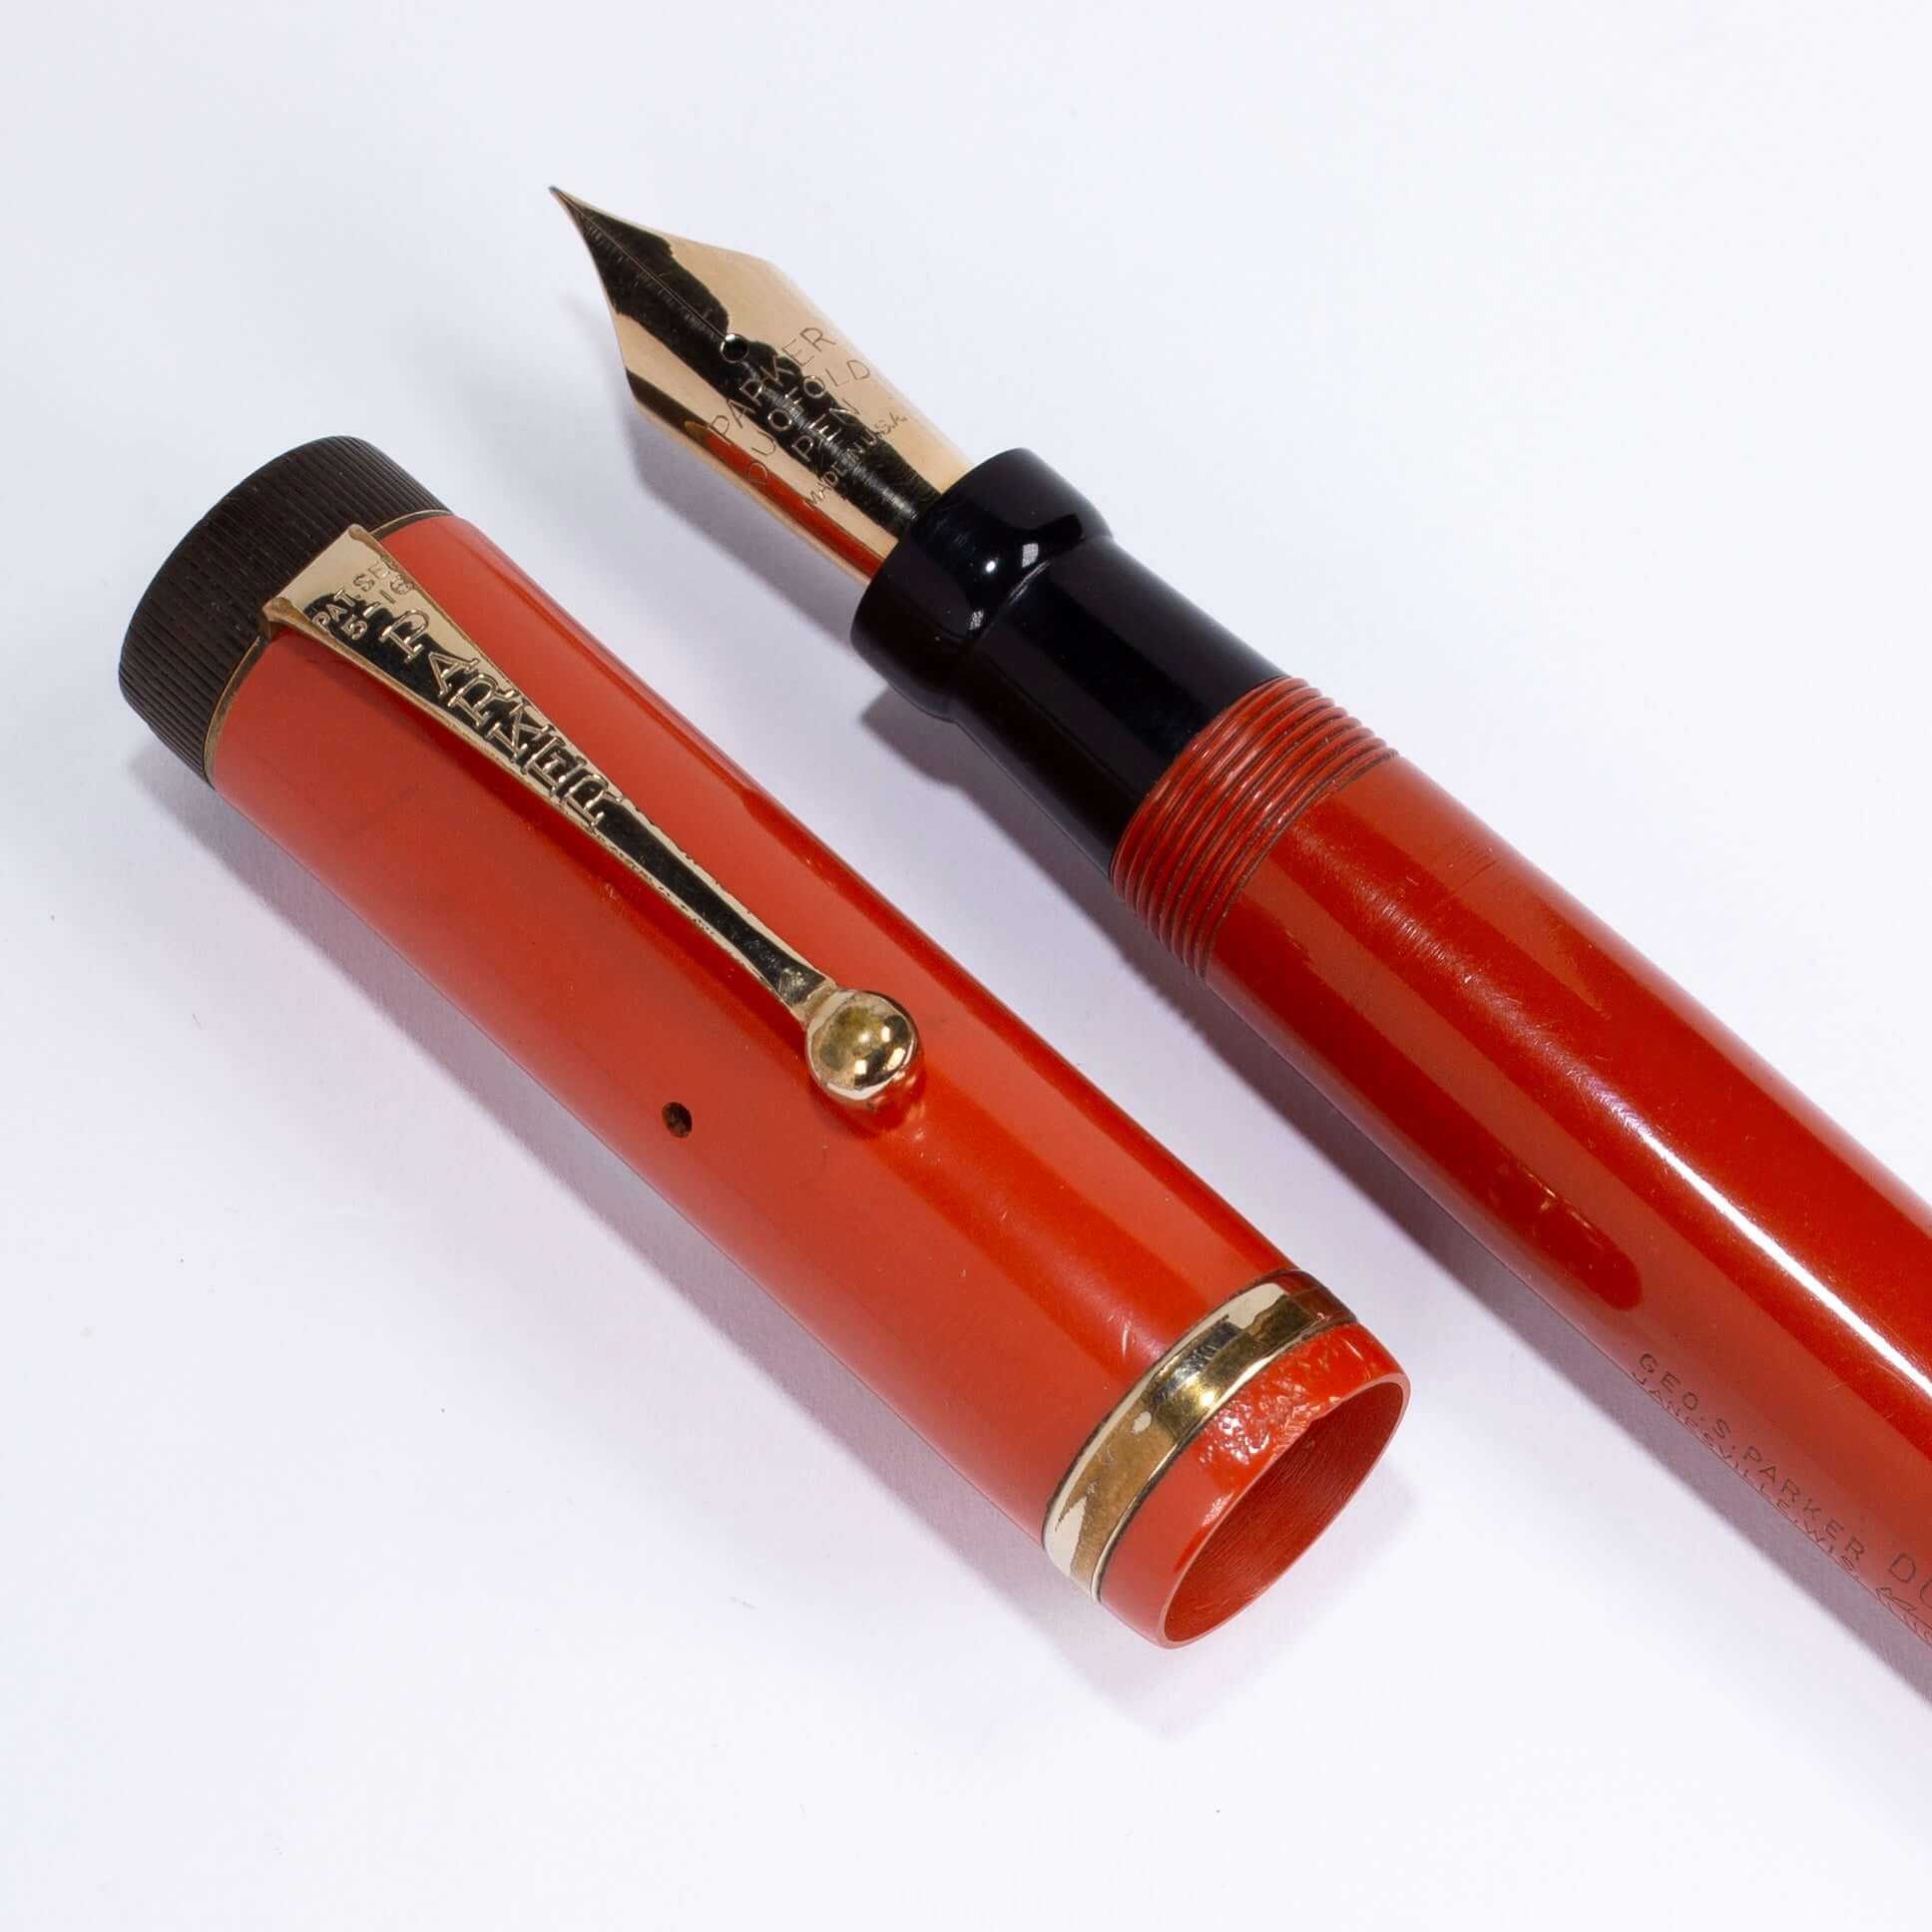 Parker Duofold Senior, Red Hard Rubber, Raised Cap Band, Button Fill, Large 14K Gold Duofold nib. Comes in original box with instruction sheet. Name/Type: Parker Senior Duofold Manufacture Year: 1920s Length: 5 1/2 Filling System: Button filler; Restored